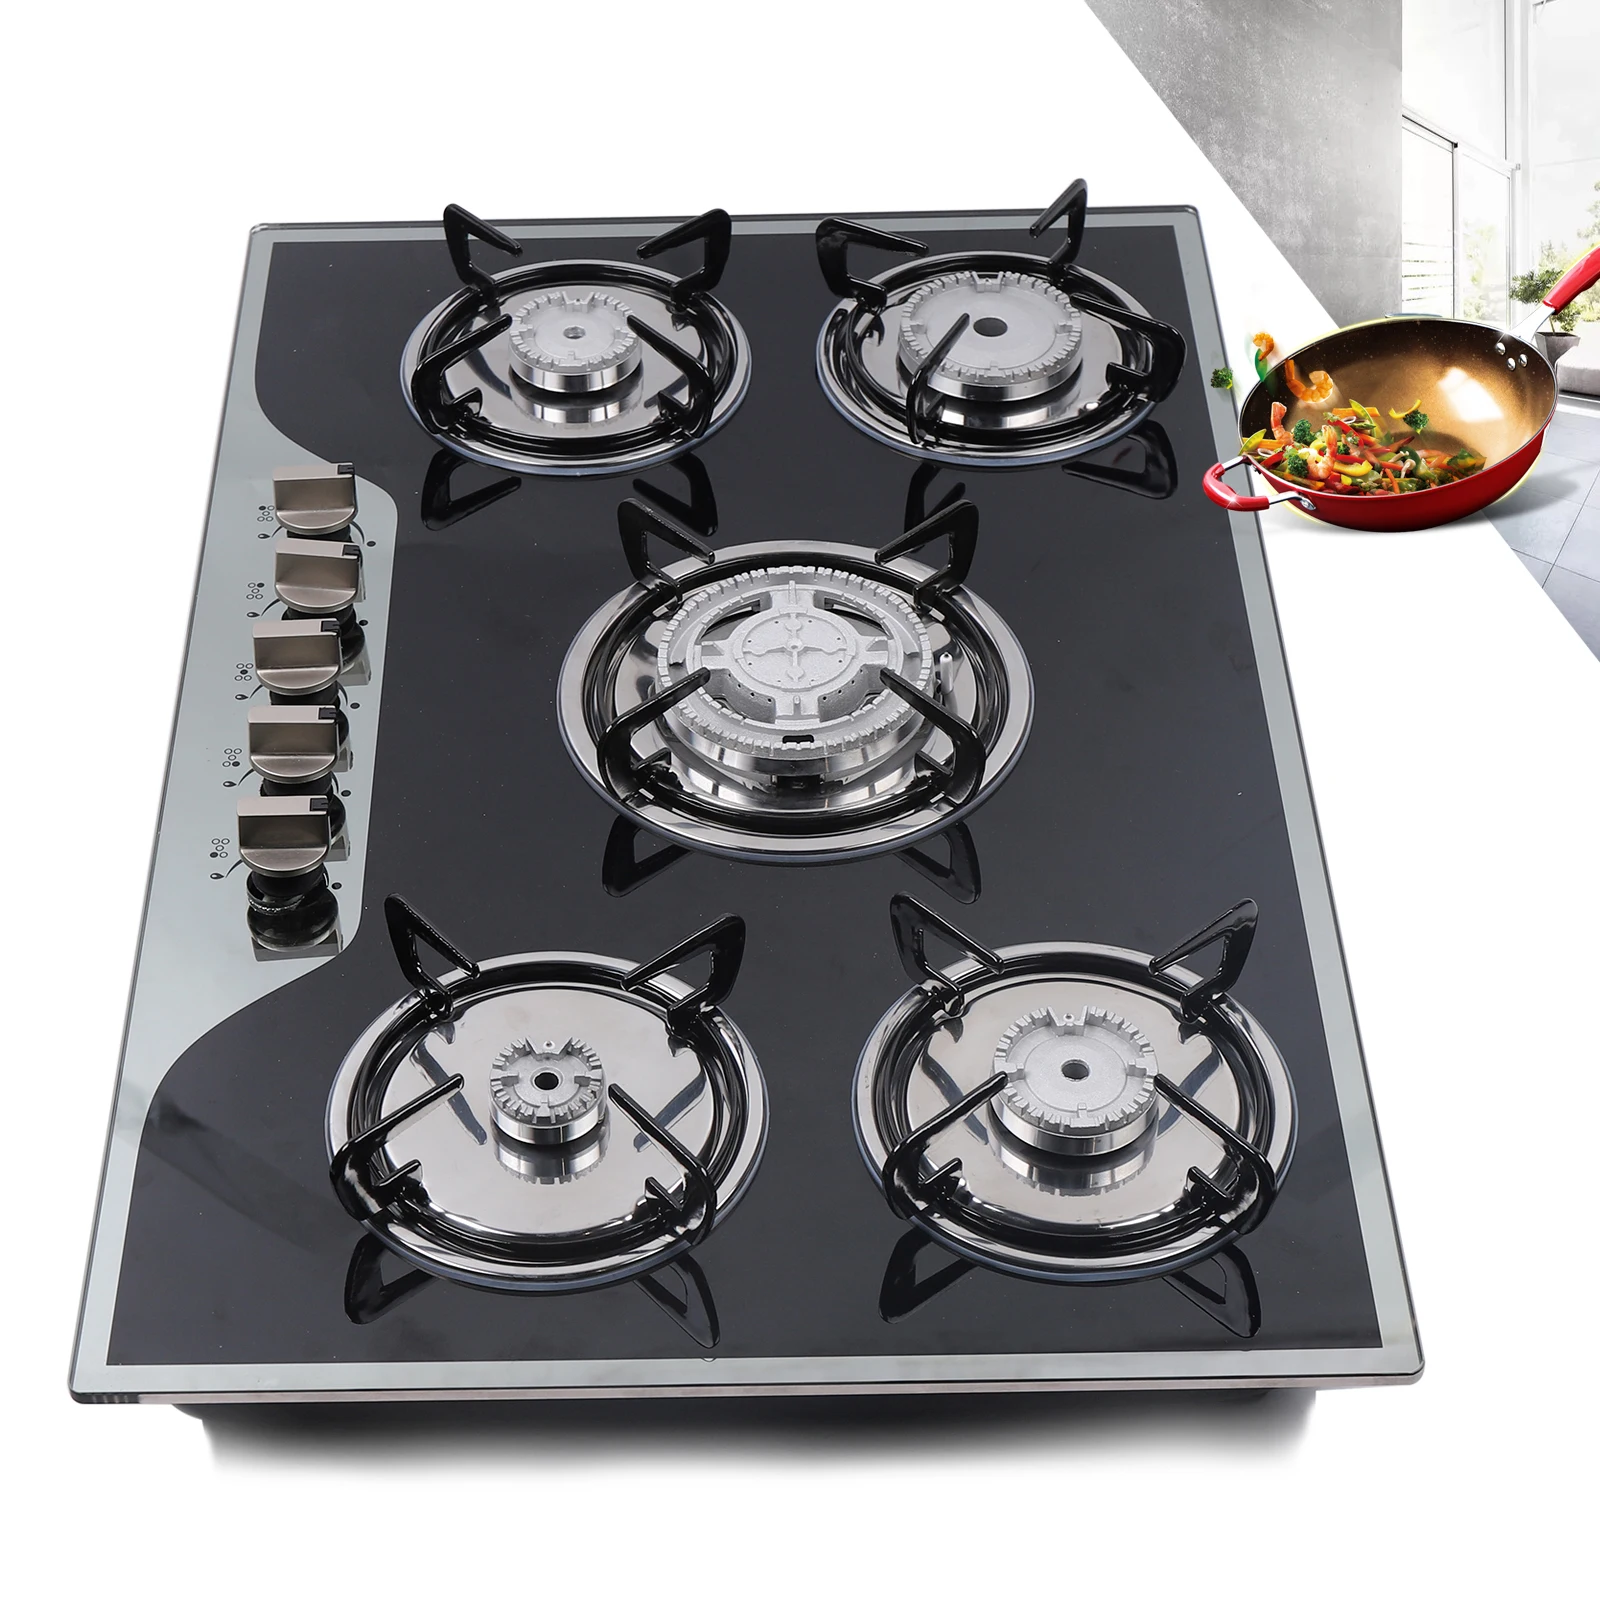 LPG/NG Gas COOKTOP with Built-in 5Burner, Stove Hob Cooktop, Tempered Glass